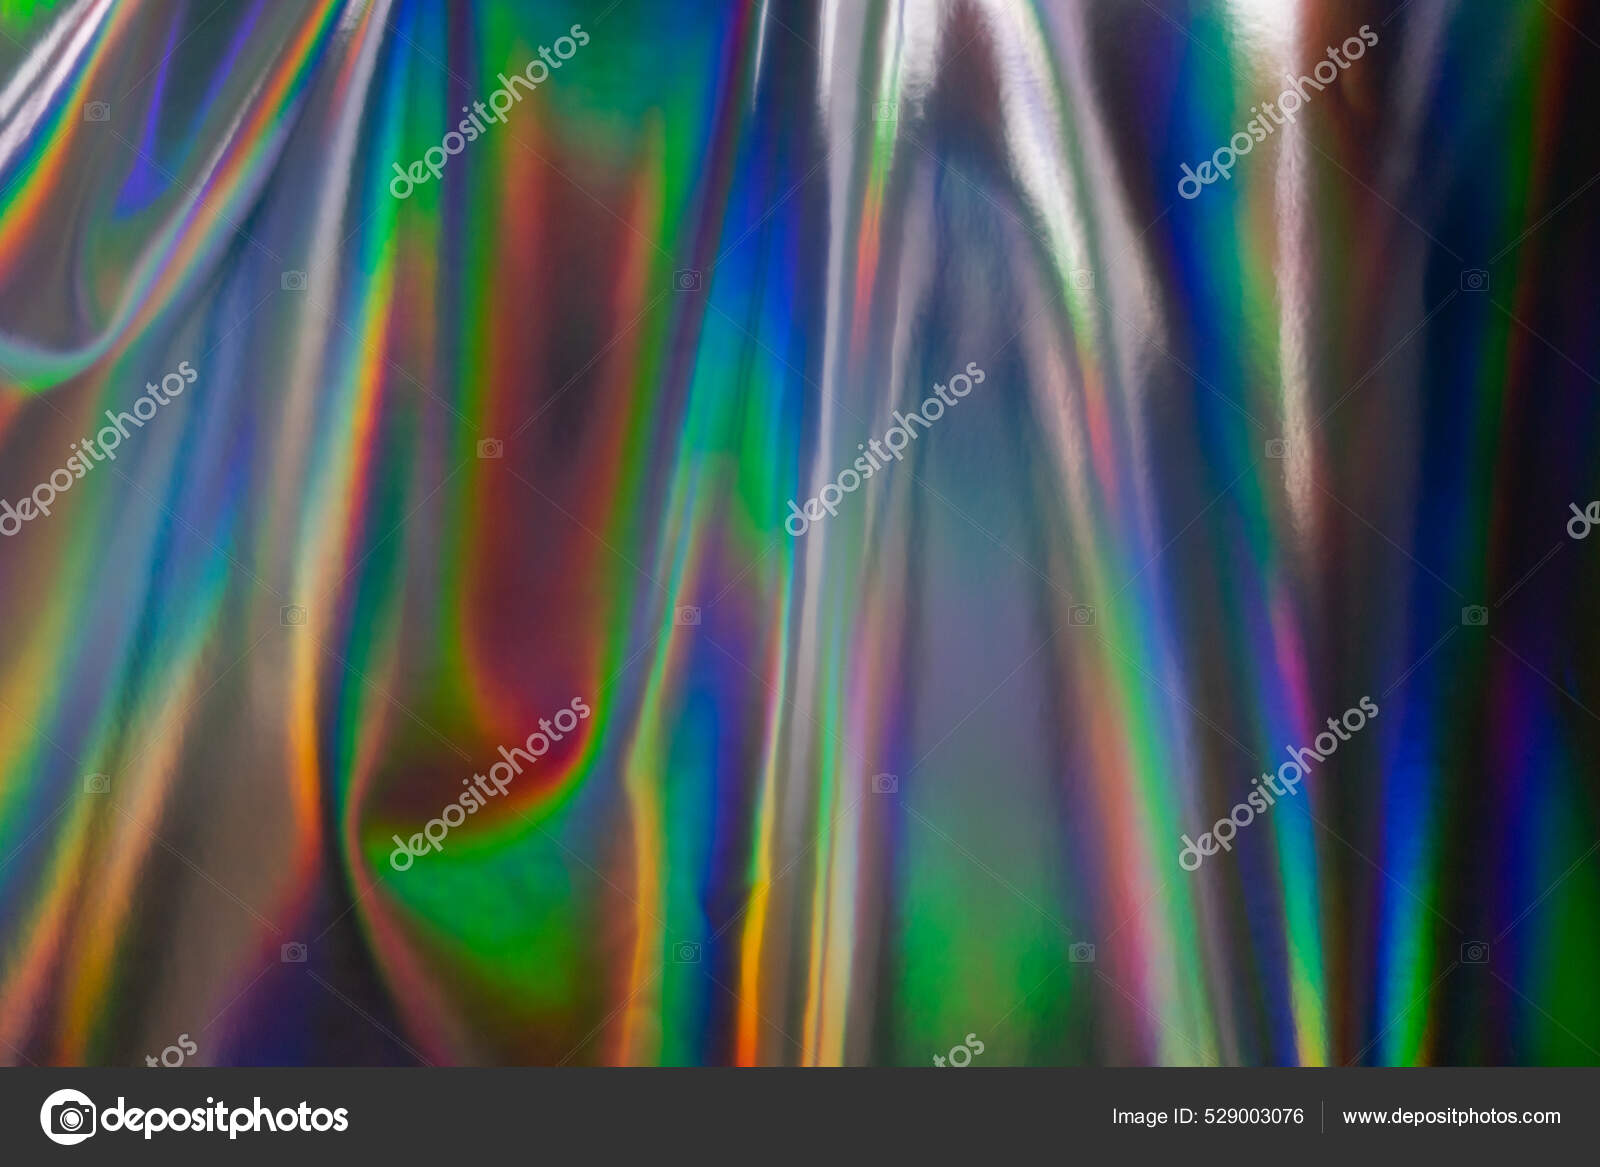 Waterproof Vinyl Photography Backdrop - Holographic Ripple - Prop Face